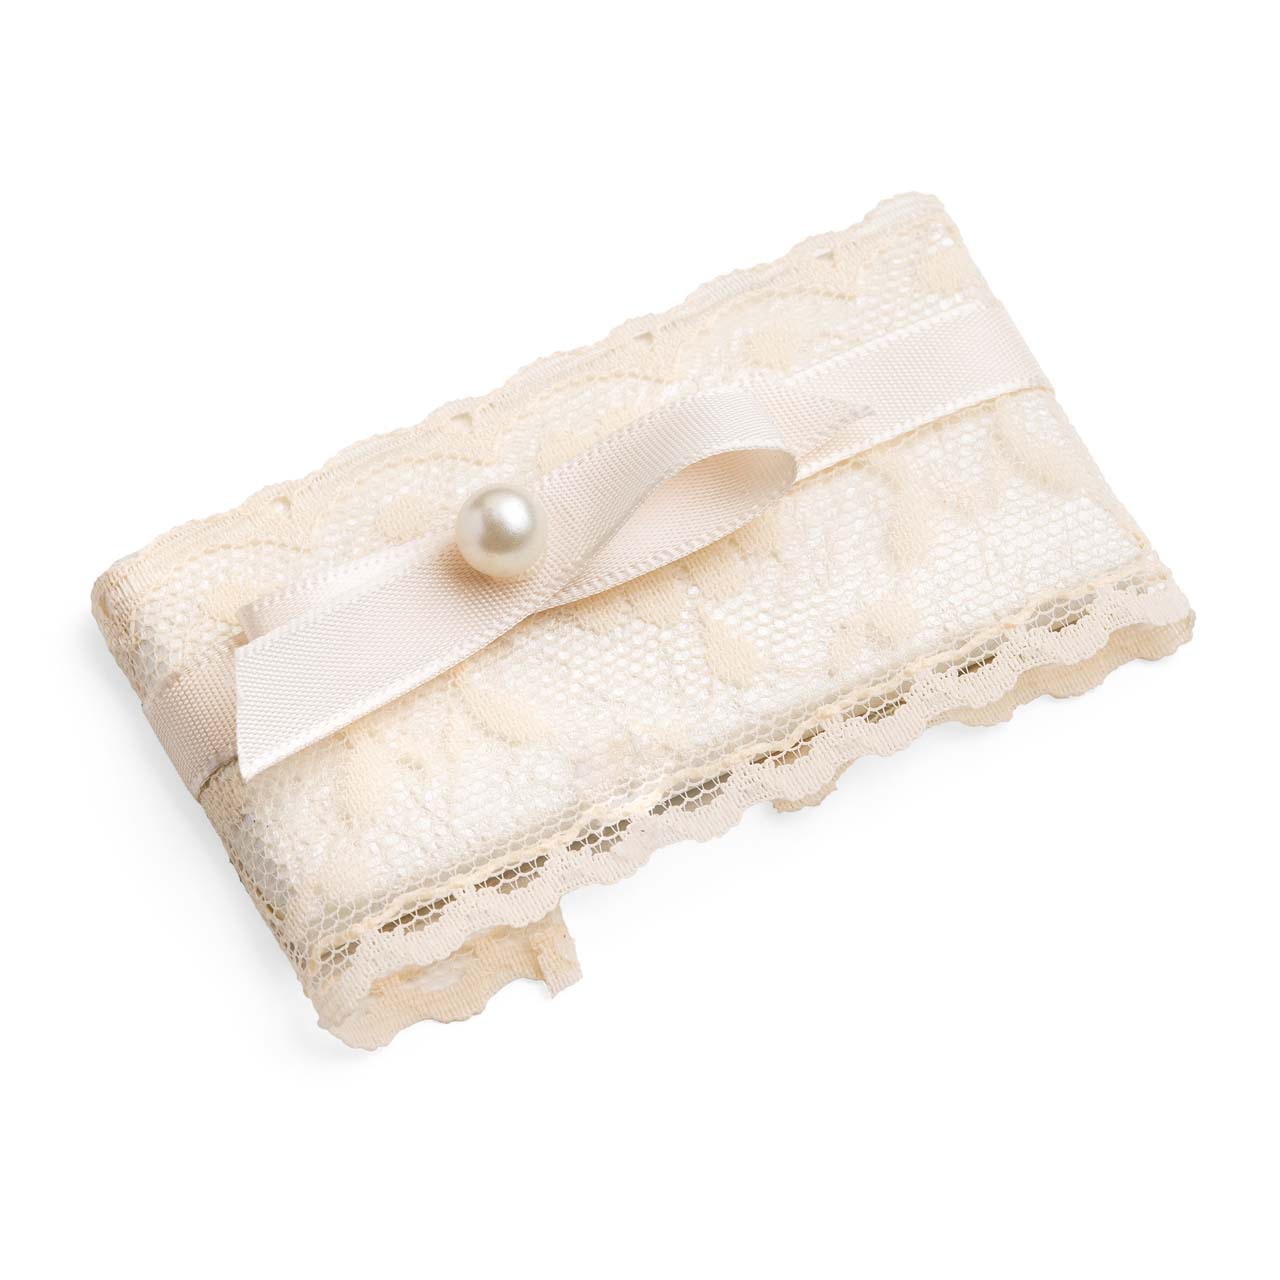 legance in Lace and Pearl Decorated Chocolate Bar